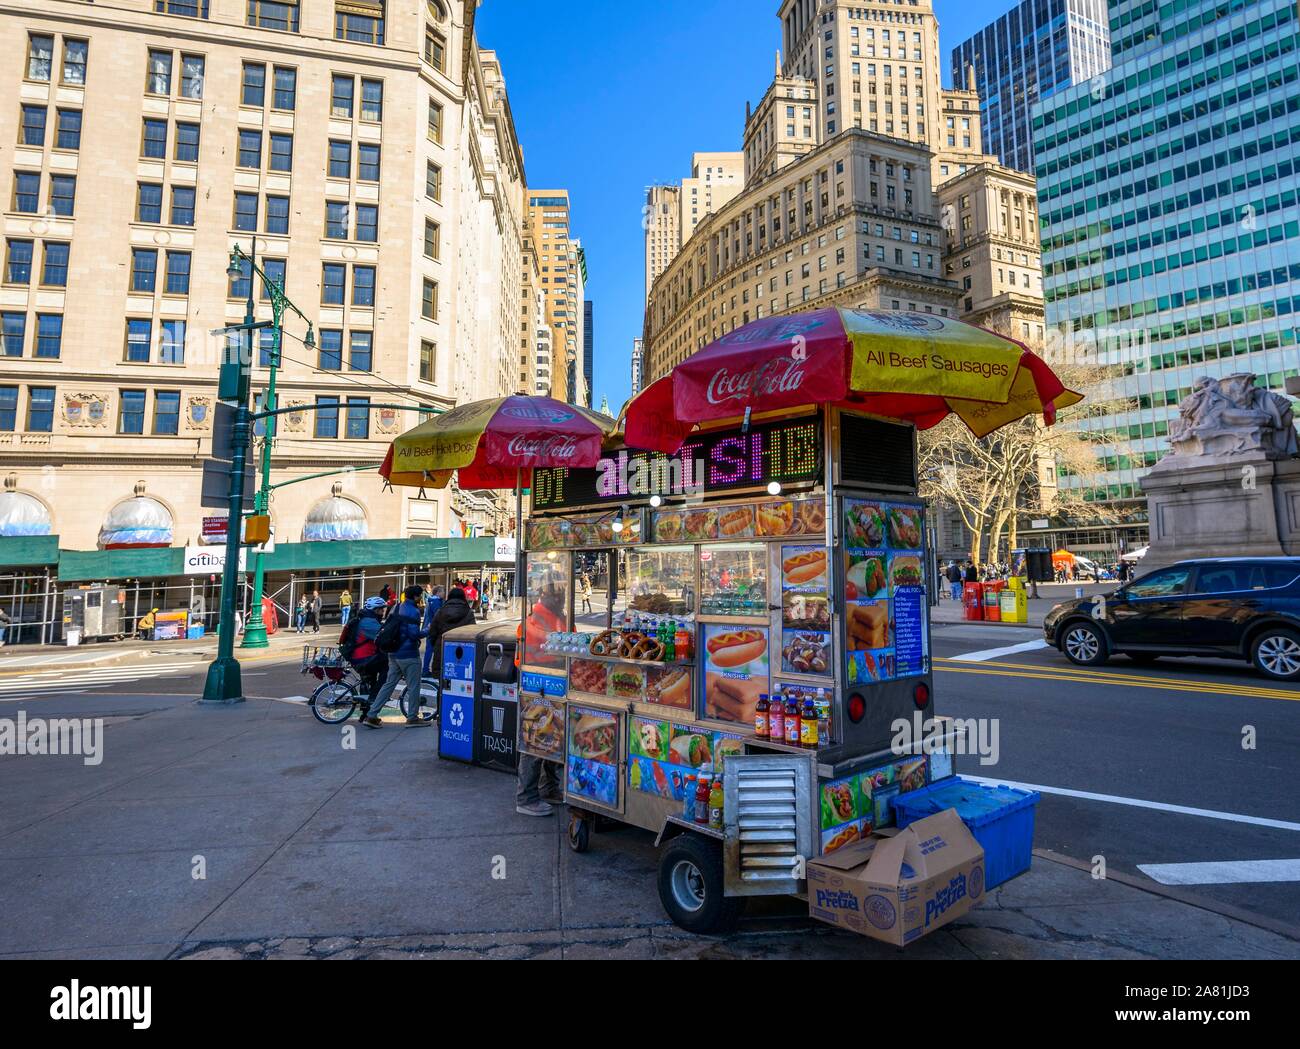 Typical snack stand with Fast Food, Food Truck, Lower Manhattan, New York, USA Stock Photo